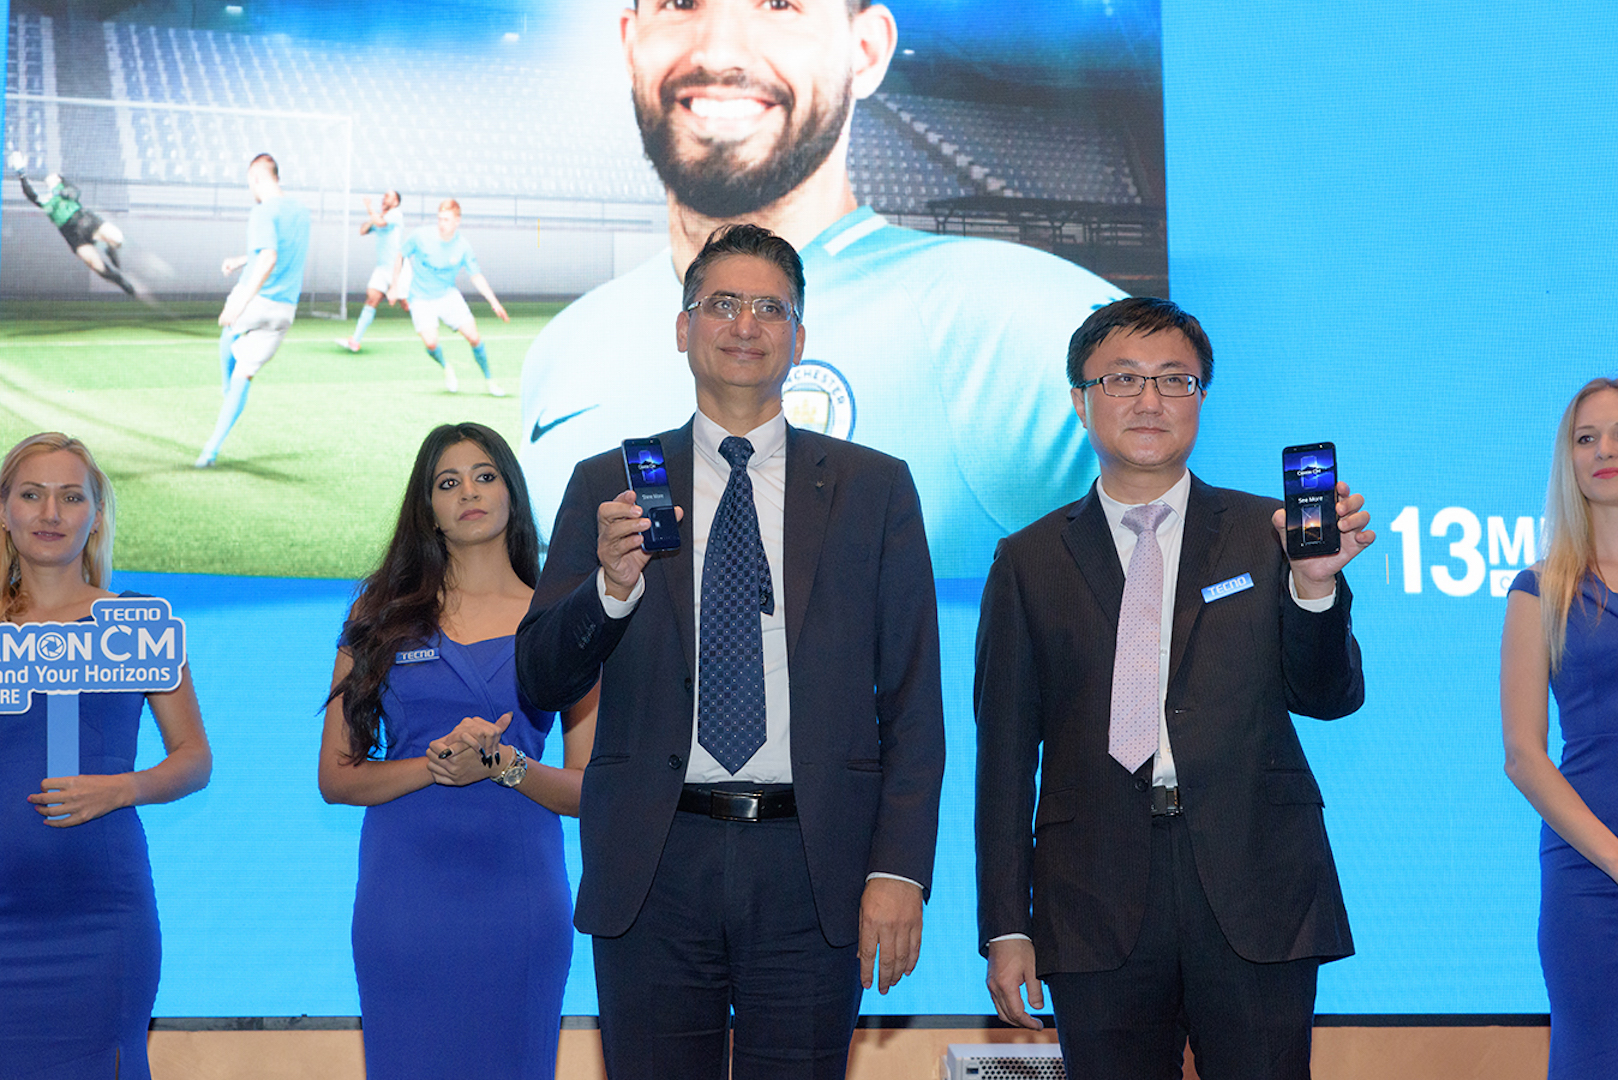 Photo of TECNO Launches Camon CM and Inks Disty Deal with Jumbo